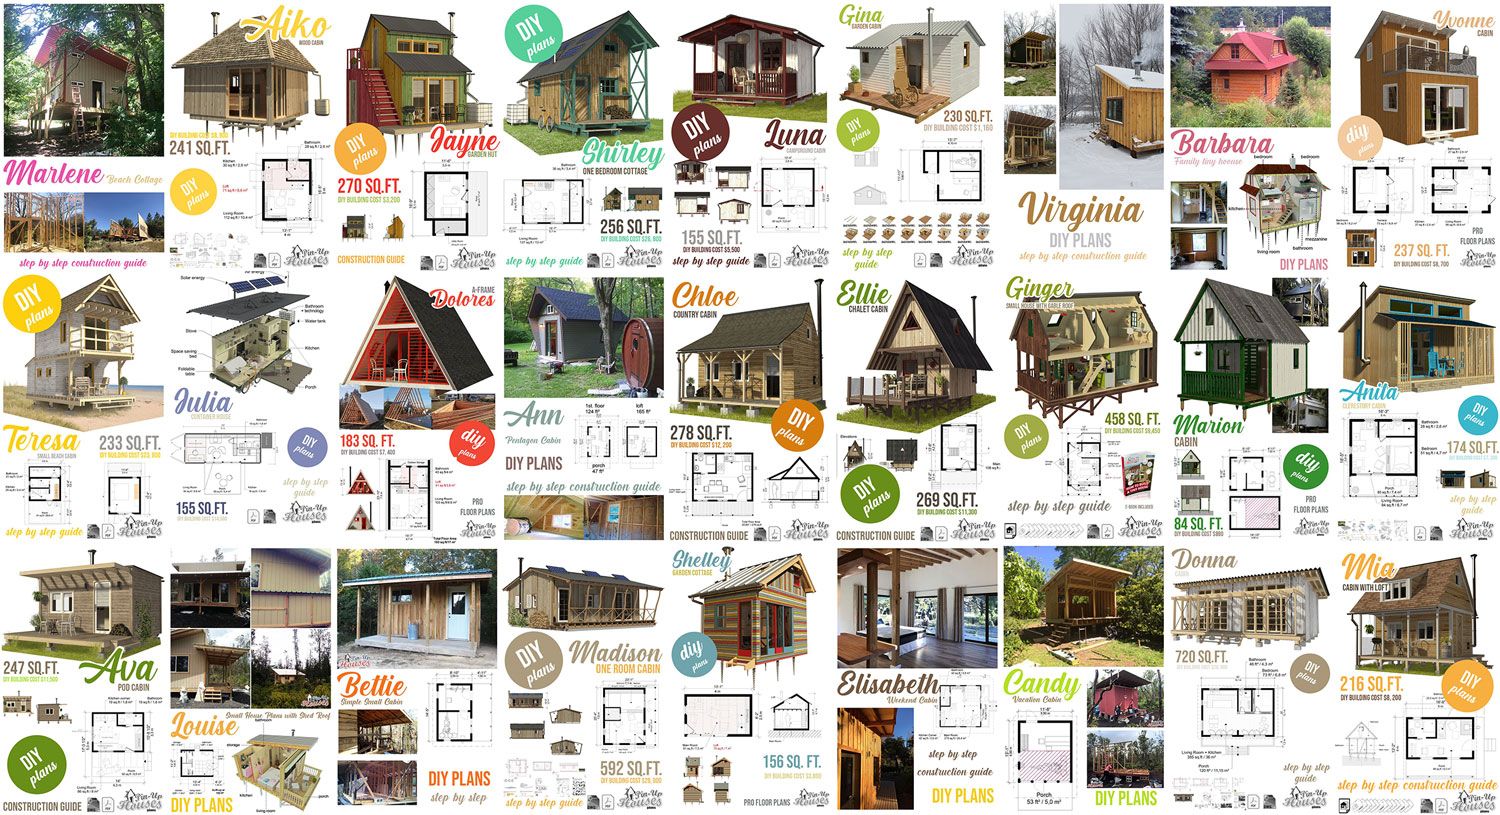 The 27 Best Small Cabin Plans (Garden Shed Plans, Micro Cottages, Small Houses) - Small Wooden